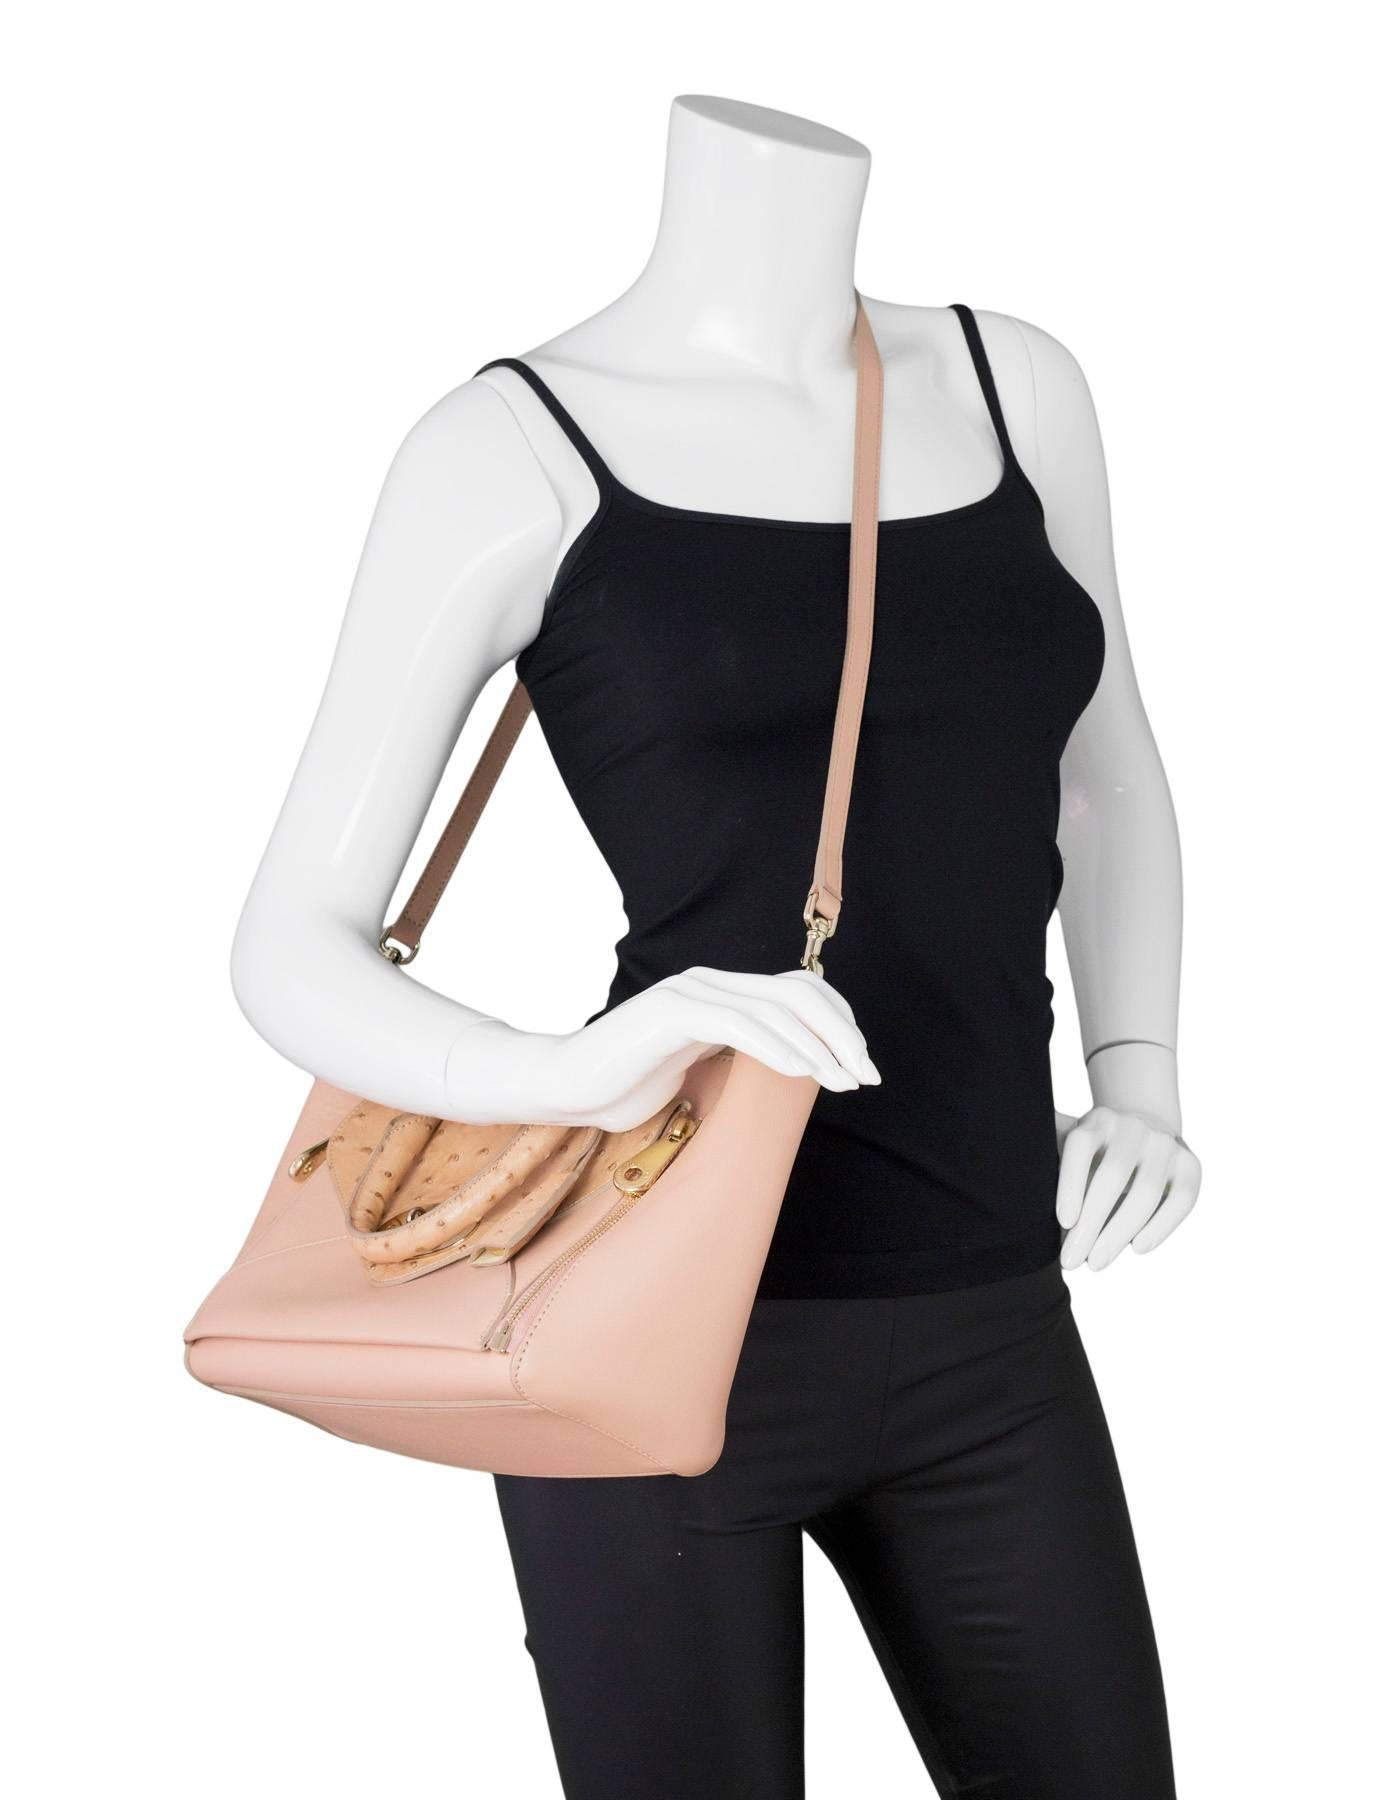 Mulberry Pink Leather and Ostrich Small Willow Tote
Front pocket can zip off and be used as a clutch

Made In: England
Color: Pink
Hardware: Goldtone
Materials: Leather, ostrich, metal
Lining: Beige suede
Closure/Opening: Open top with center snap